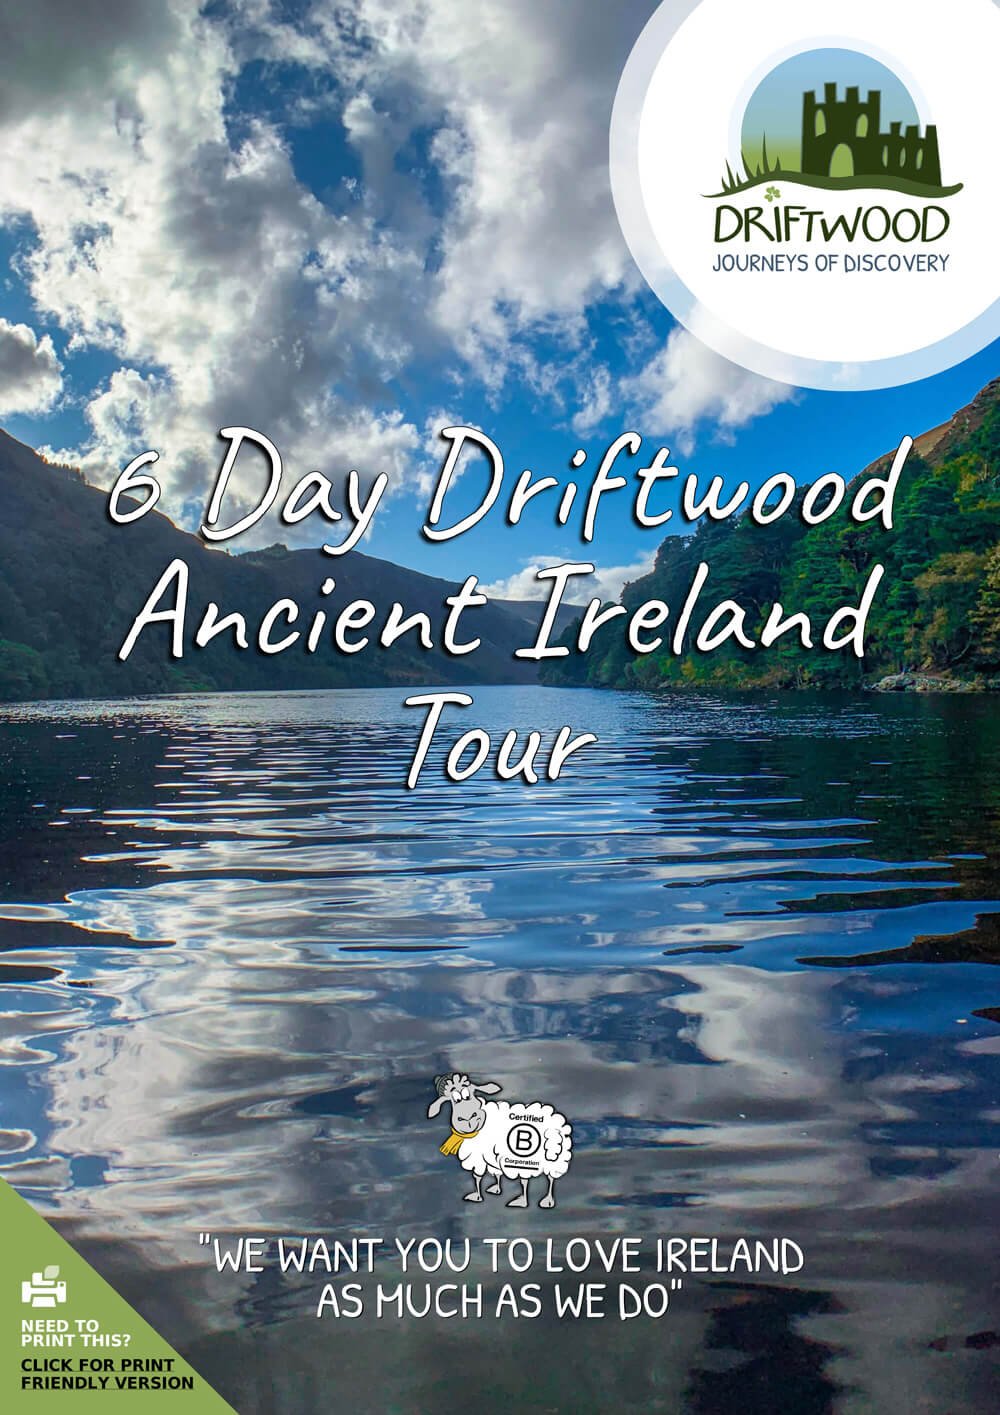 6 Day Driftwood Ancient Ireland Tour itinerary cover with Glendalough lake